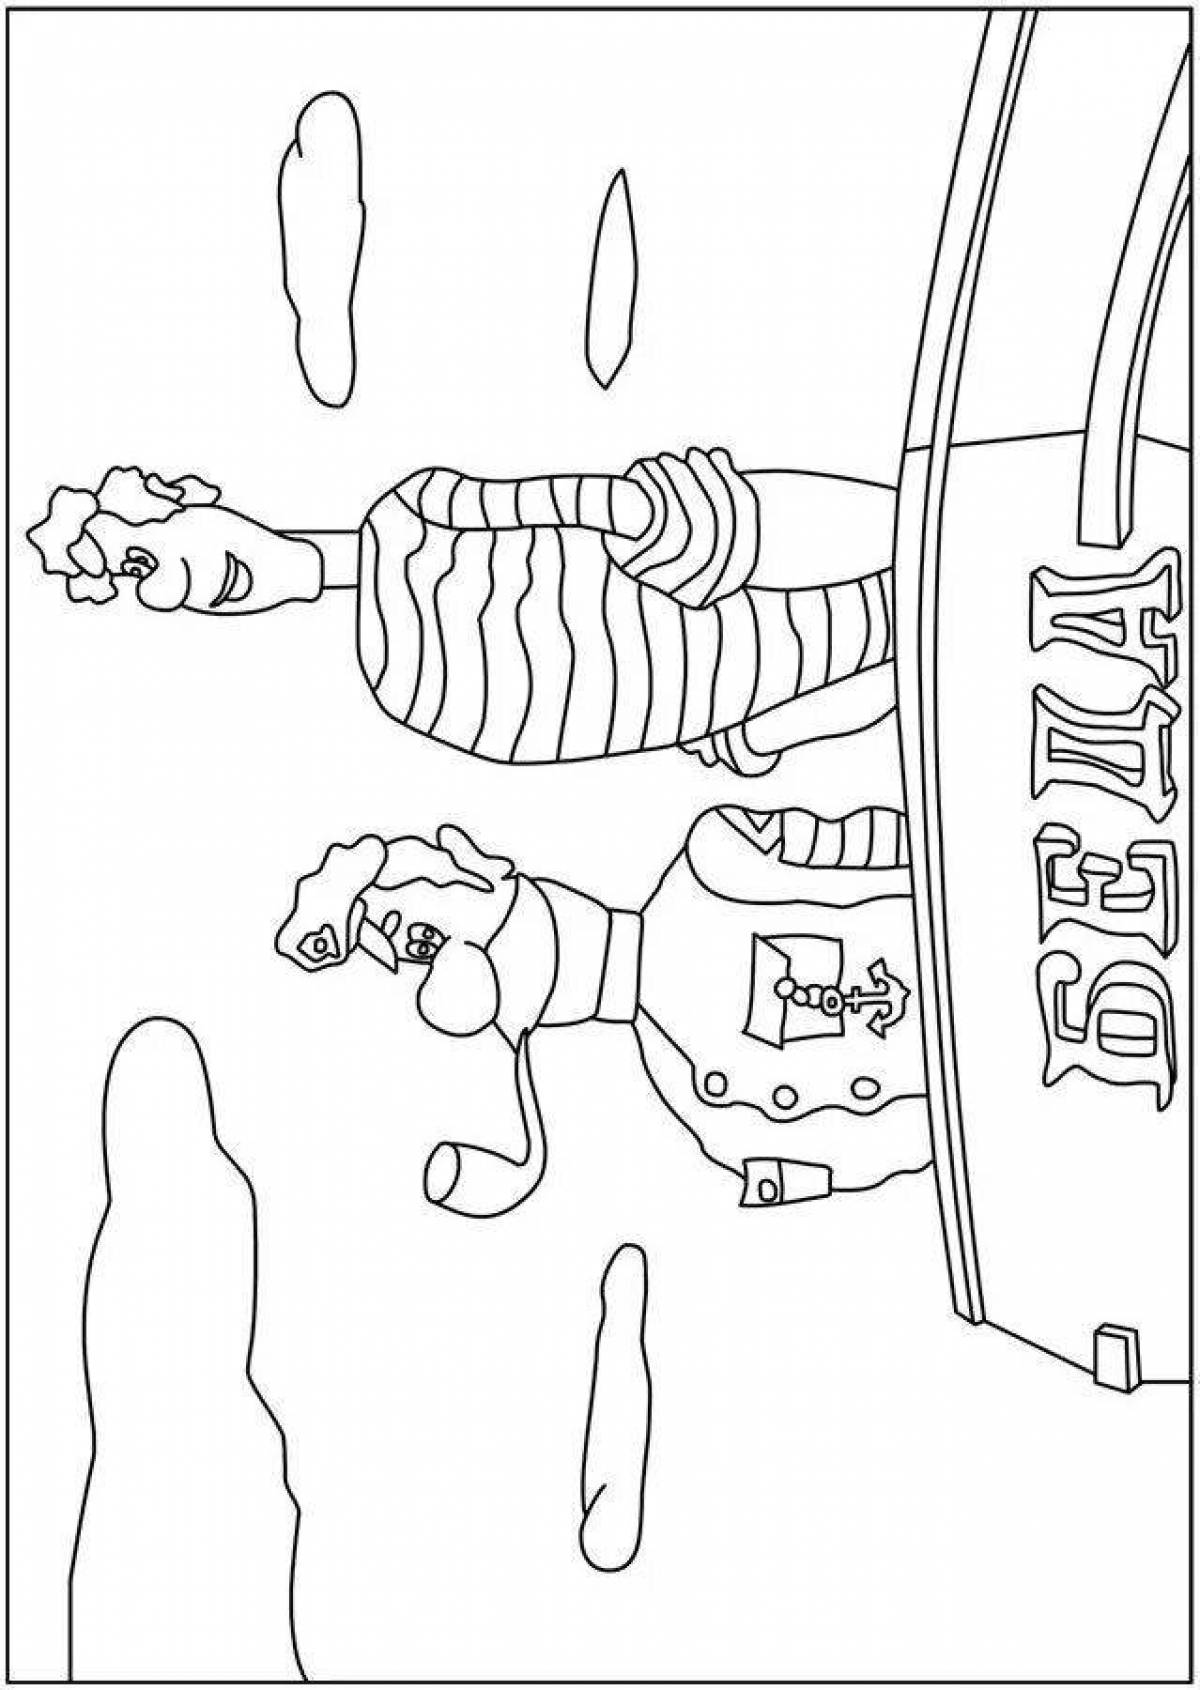 Coloring page cheerful captain vrungel